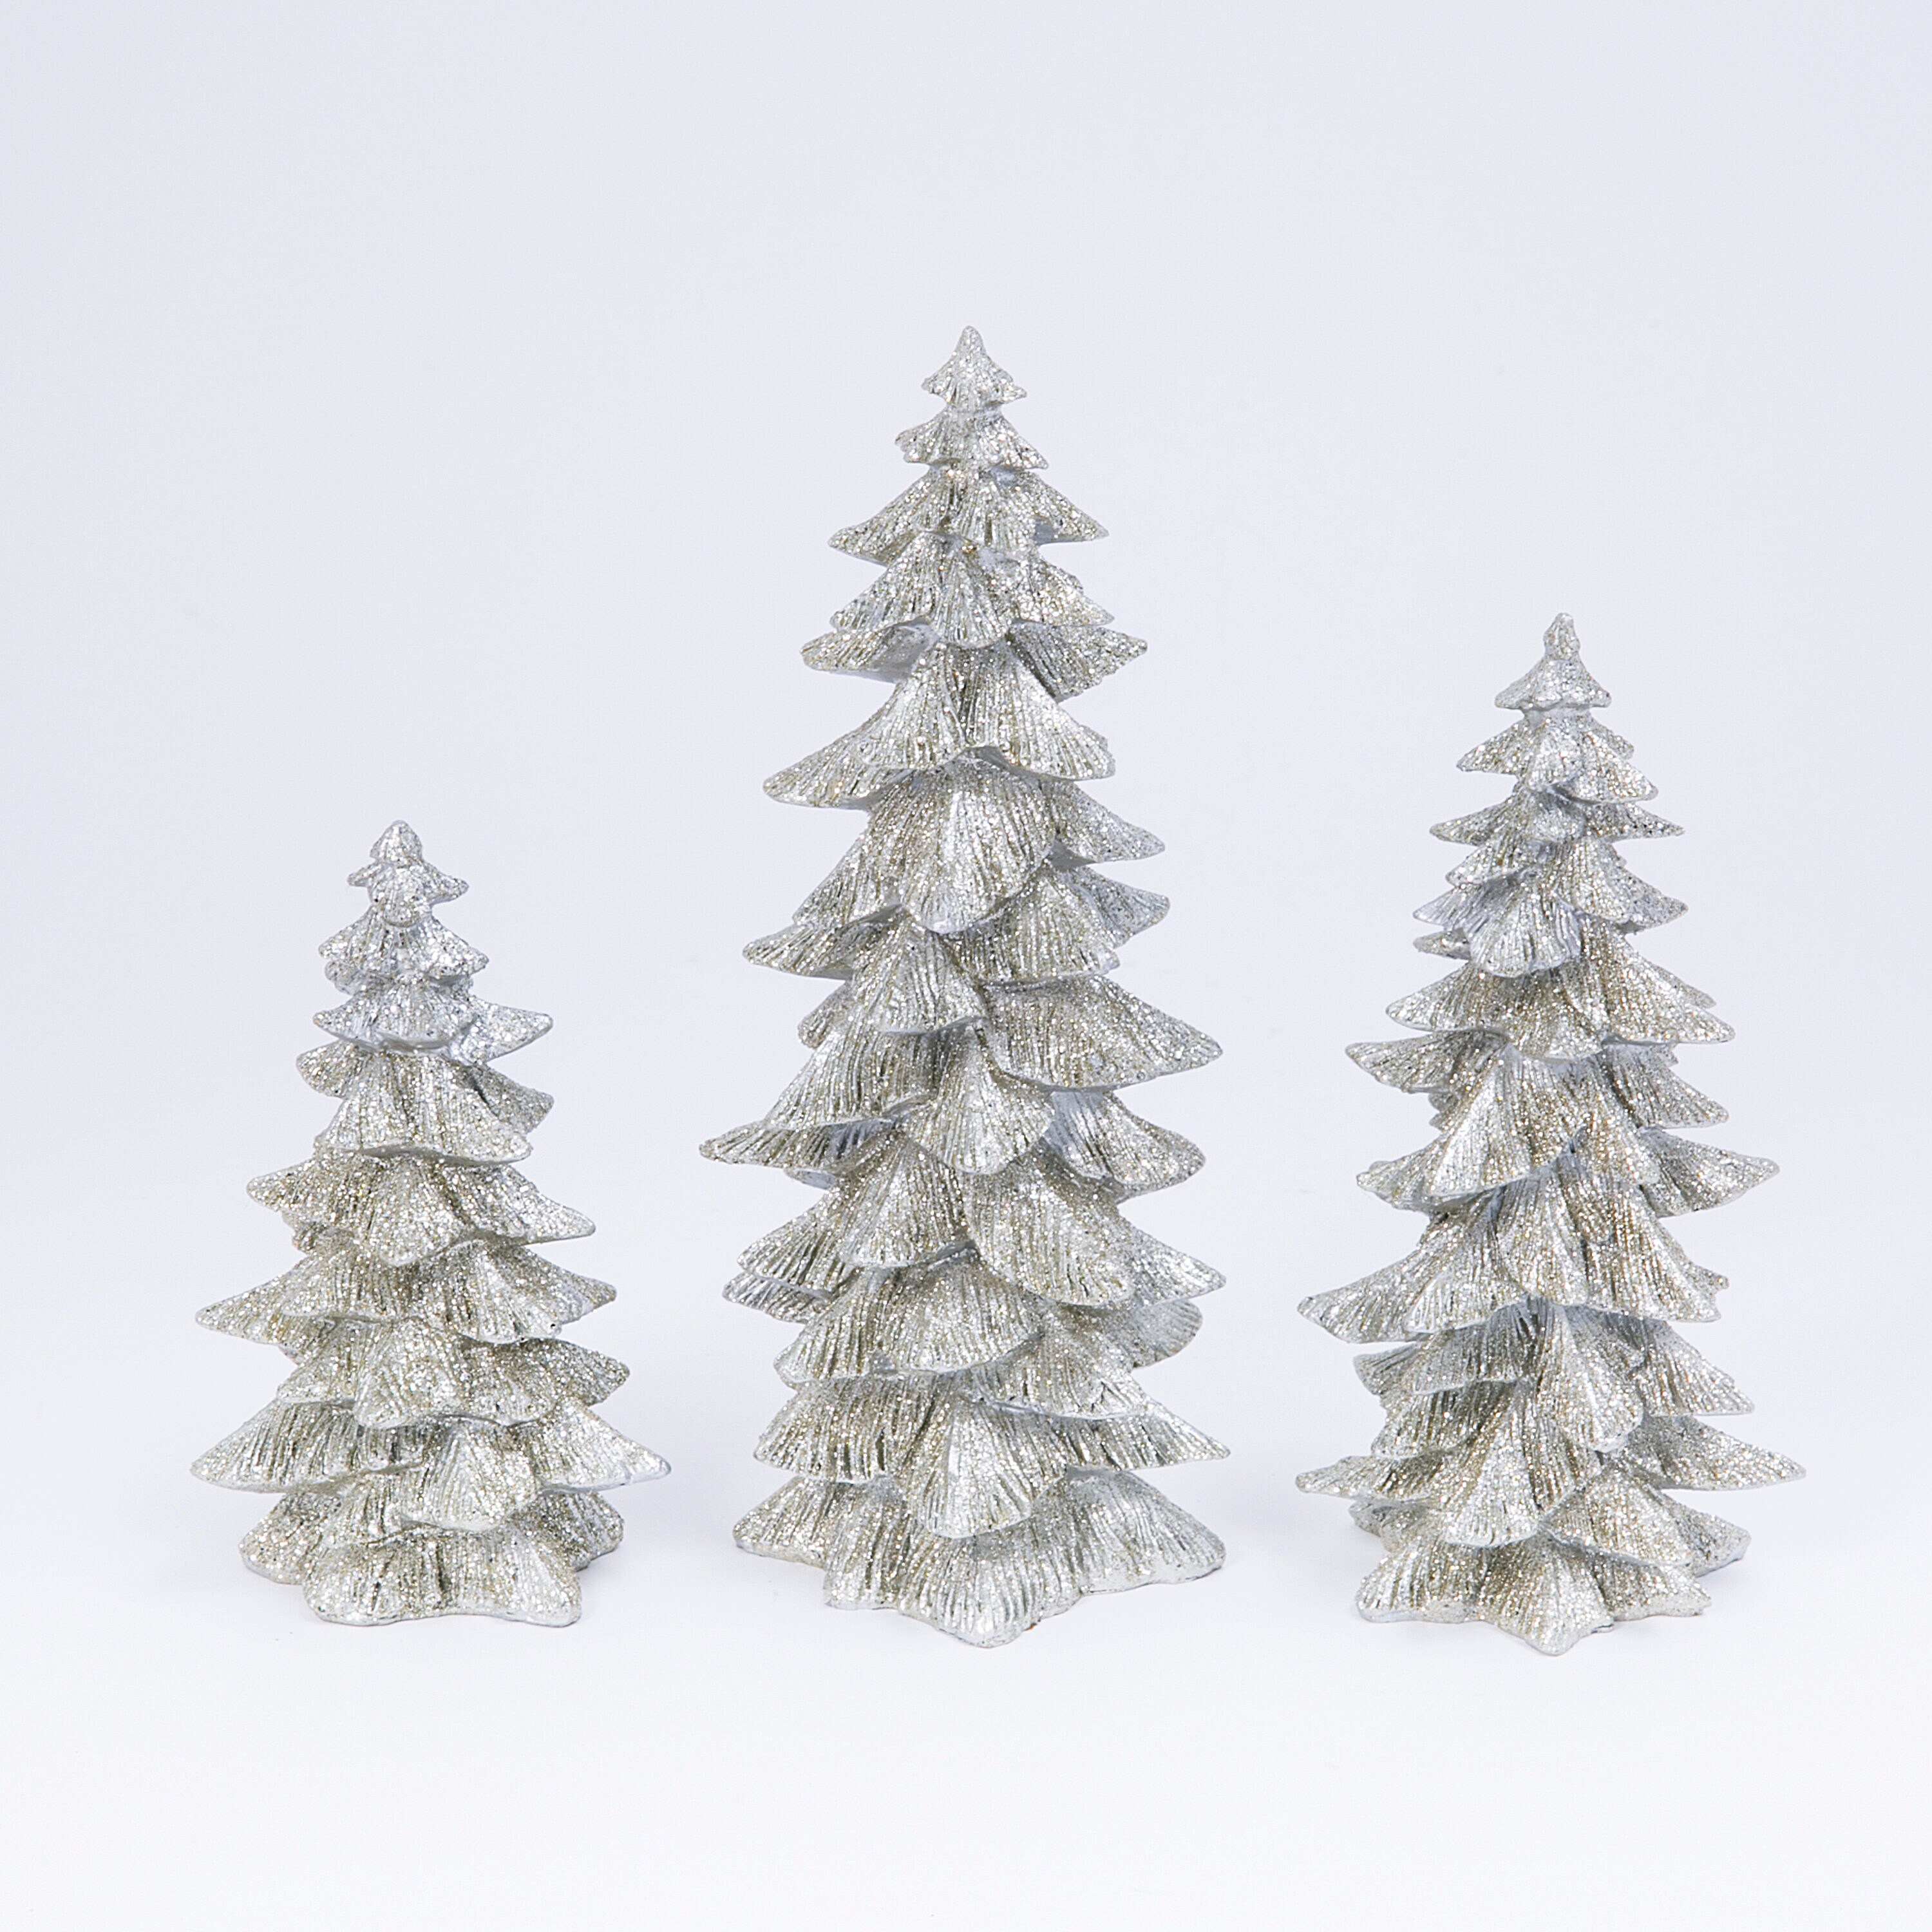 Giegxin Christmas Tree Decorations Include 12 x 34 Inch Large